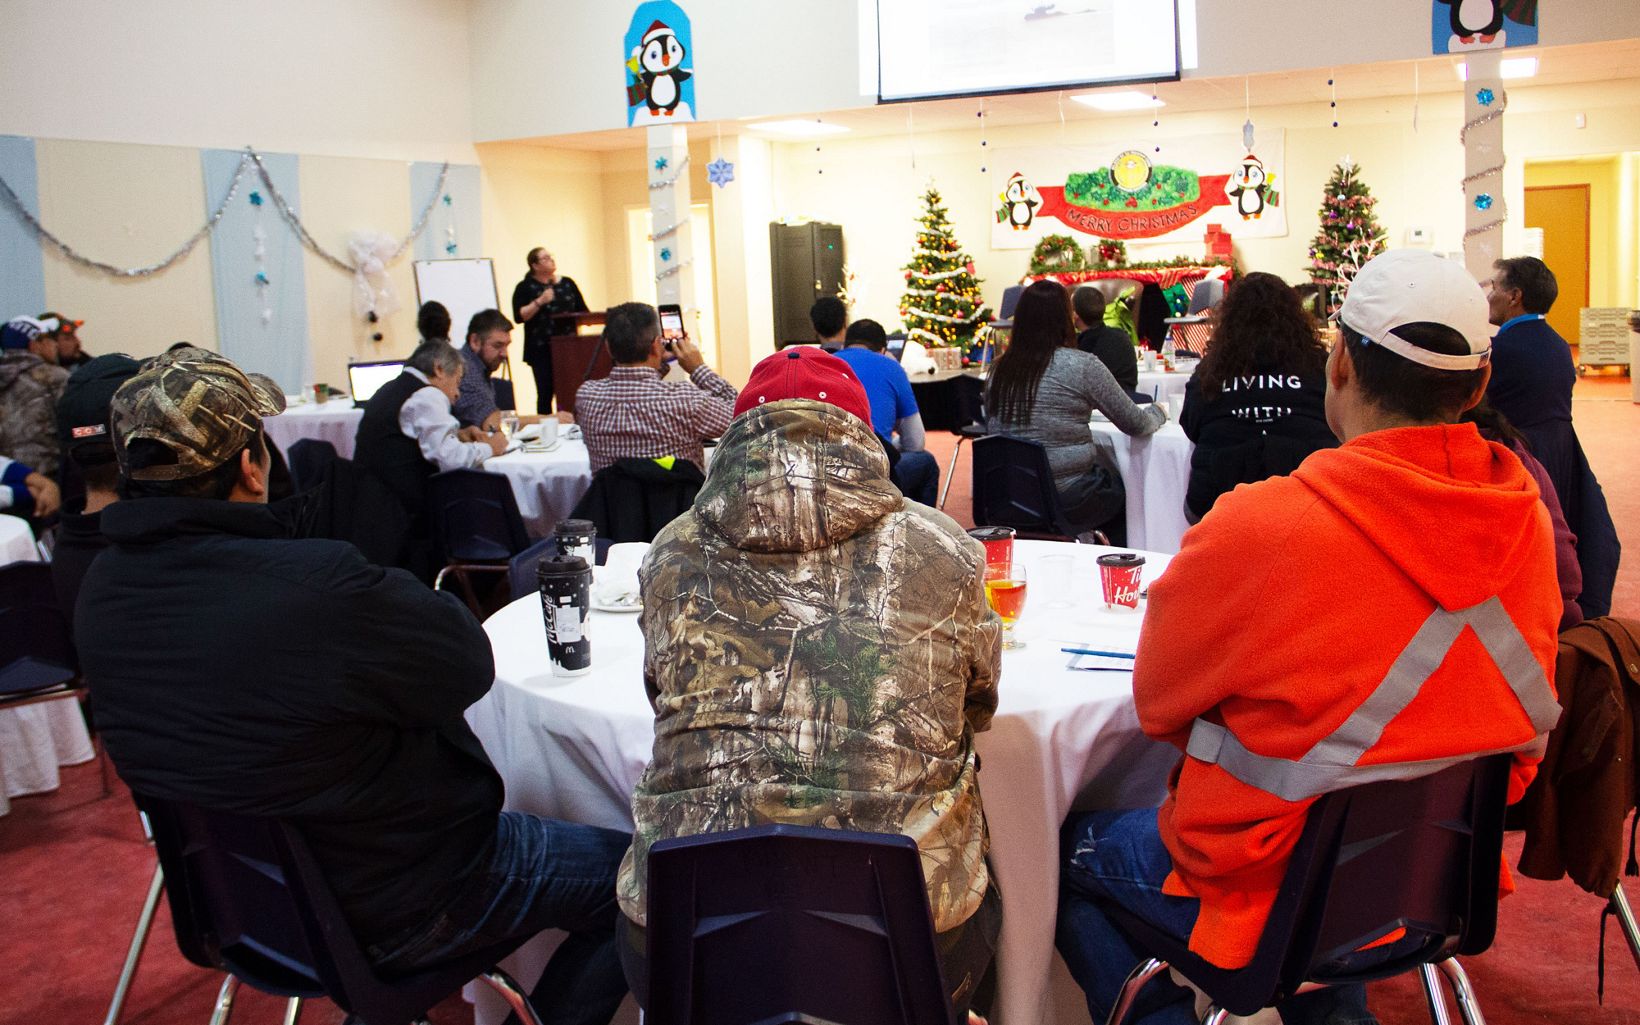 A festive spirit  at the Ma-Mow-We-Tak Friendship Centre in Thompson, Manitoba, where Nisichiwayisihik Cree Nation and Nature United co-hosted a moose workshop.  © Nature United